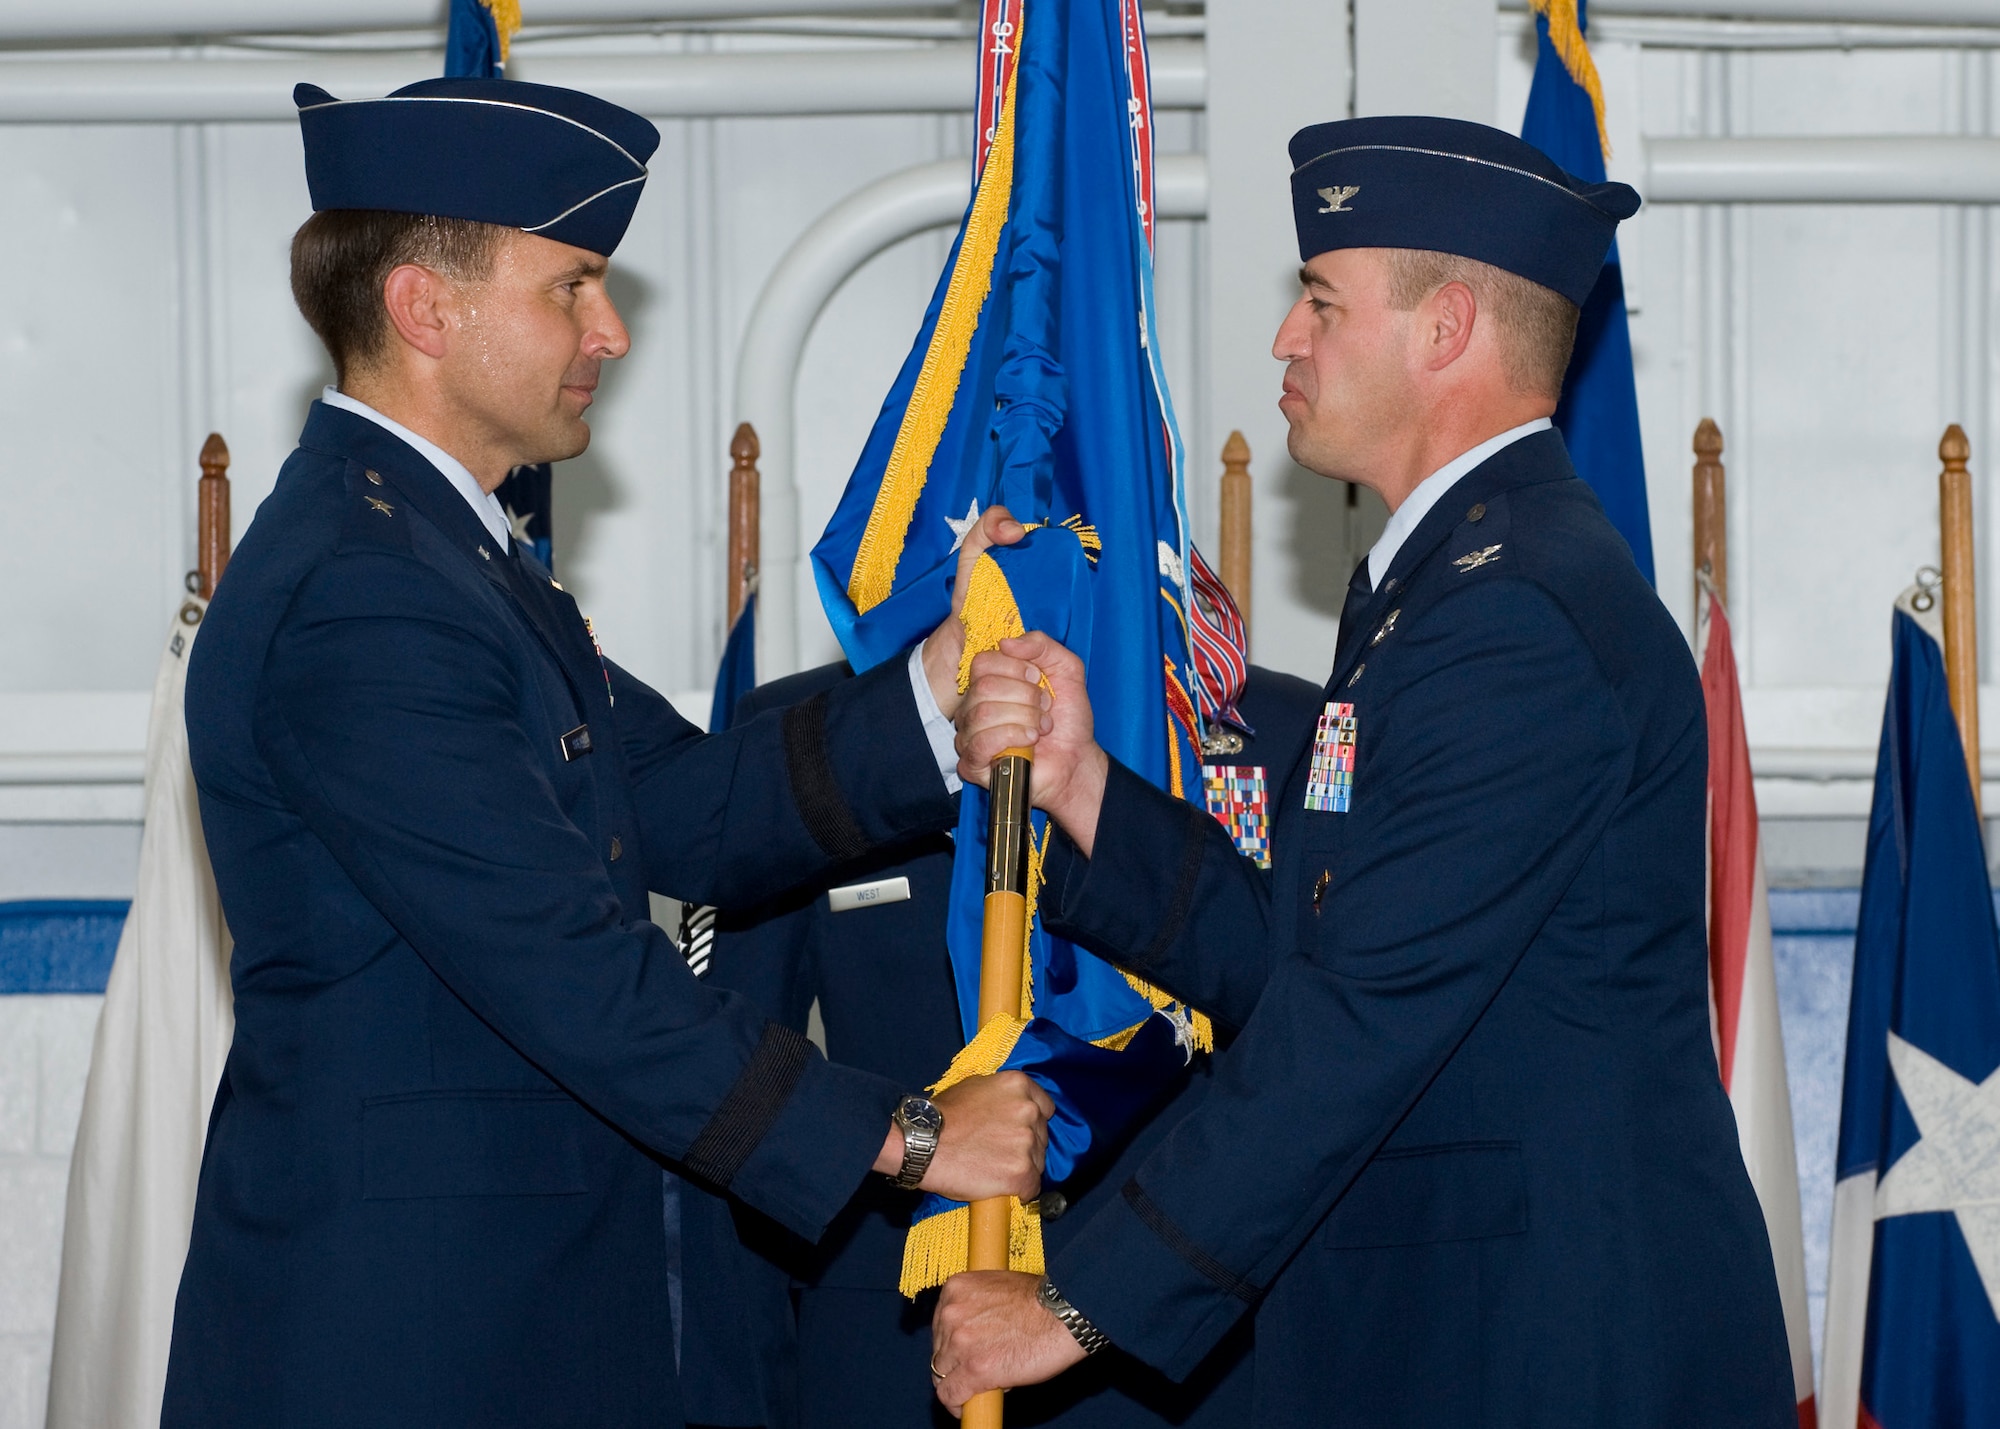 Col. Michael Gantt accepts the 53rd Wing guidon from Brig. Gen. Ted Kresge, U.S. Air Force Warfare Center commander, during the assumption of command ceremony June 24 at Eglin Air Force Base.  Colonel Gantt left his position as the vice commander of the 31st Fighter Wing to take command of the 2,000-person wing.  (U.S. Air Force photo/Greg Murray)